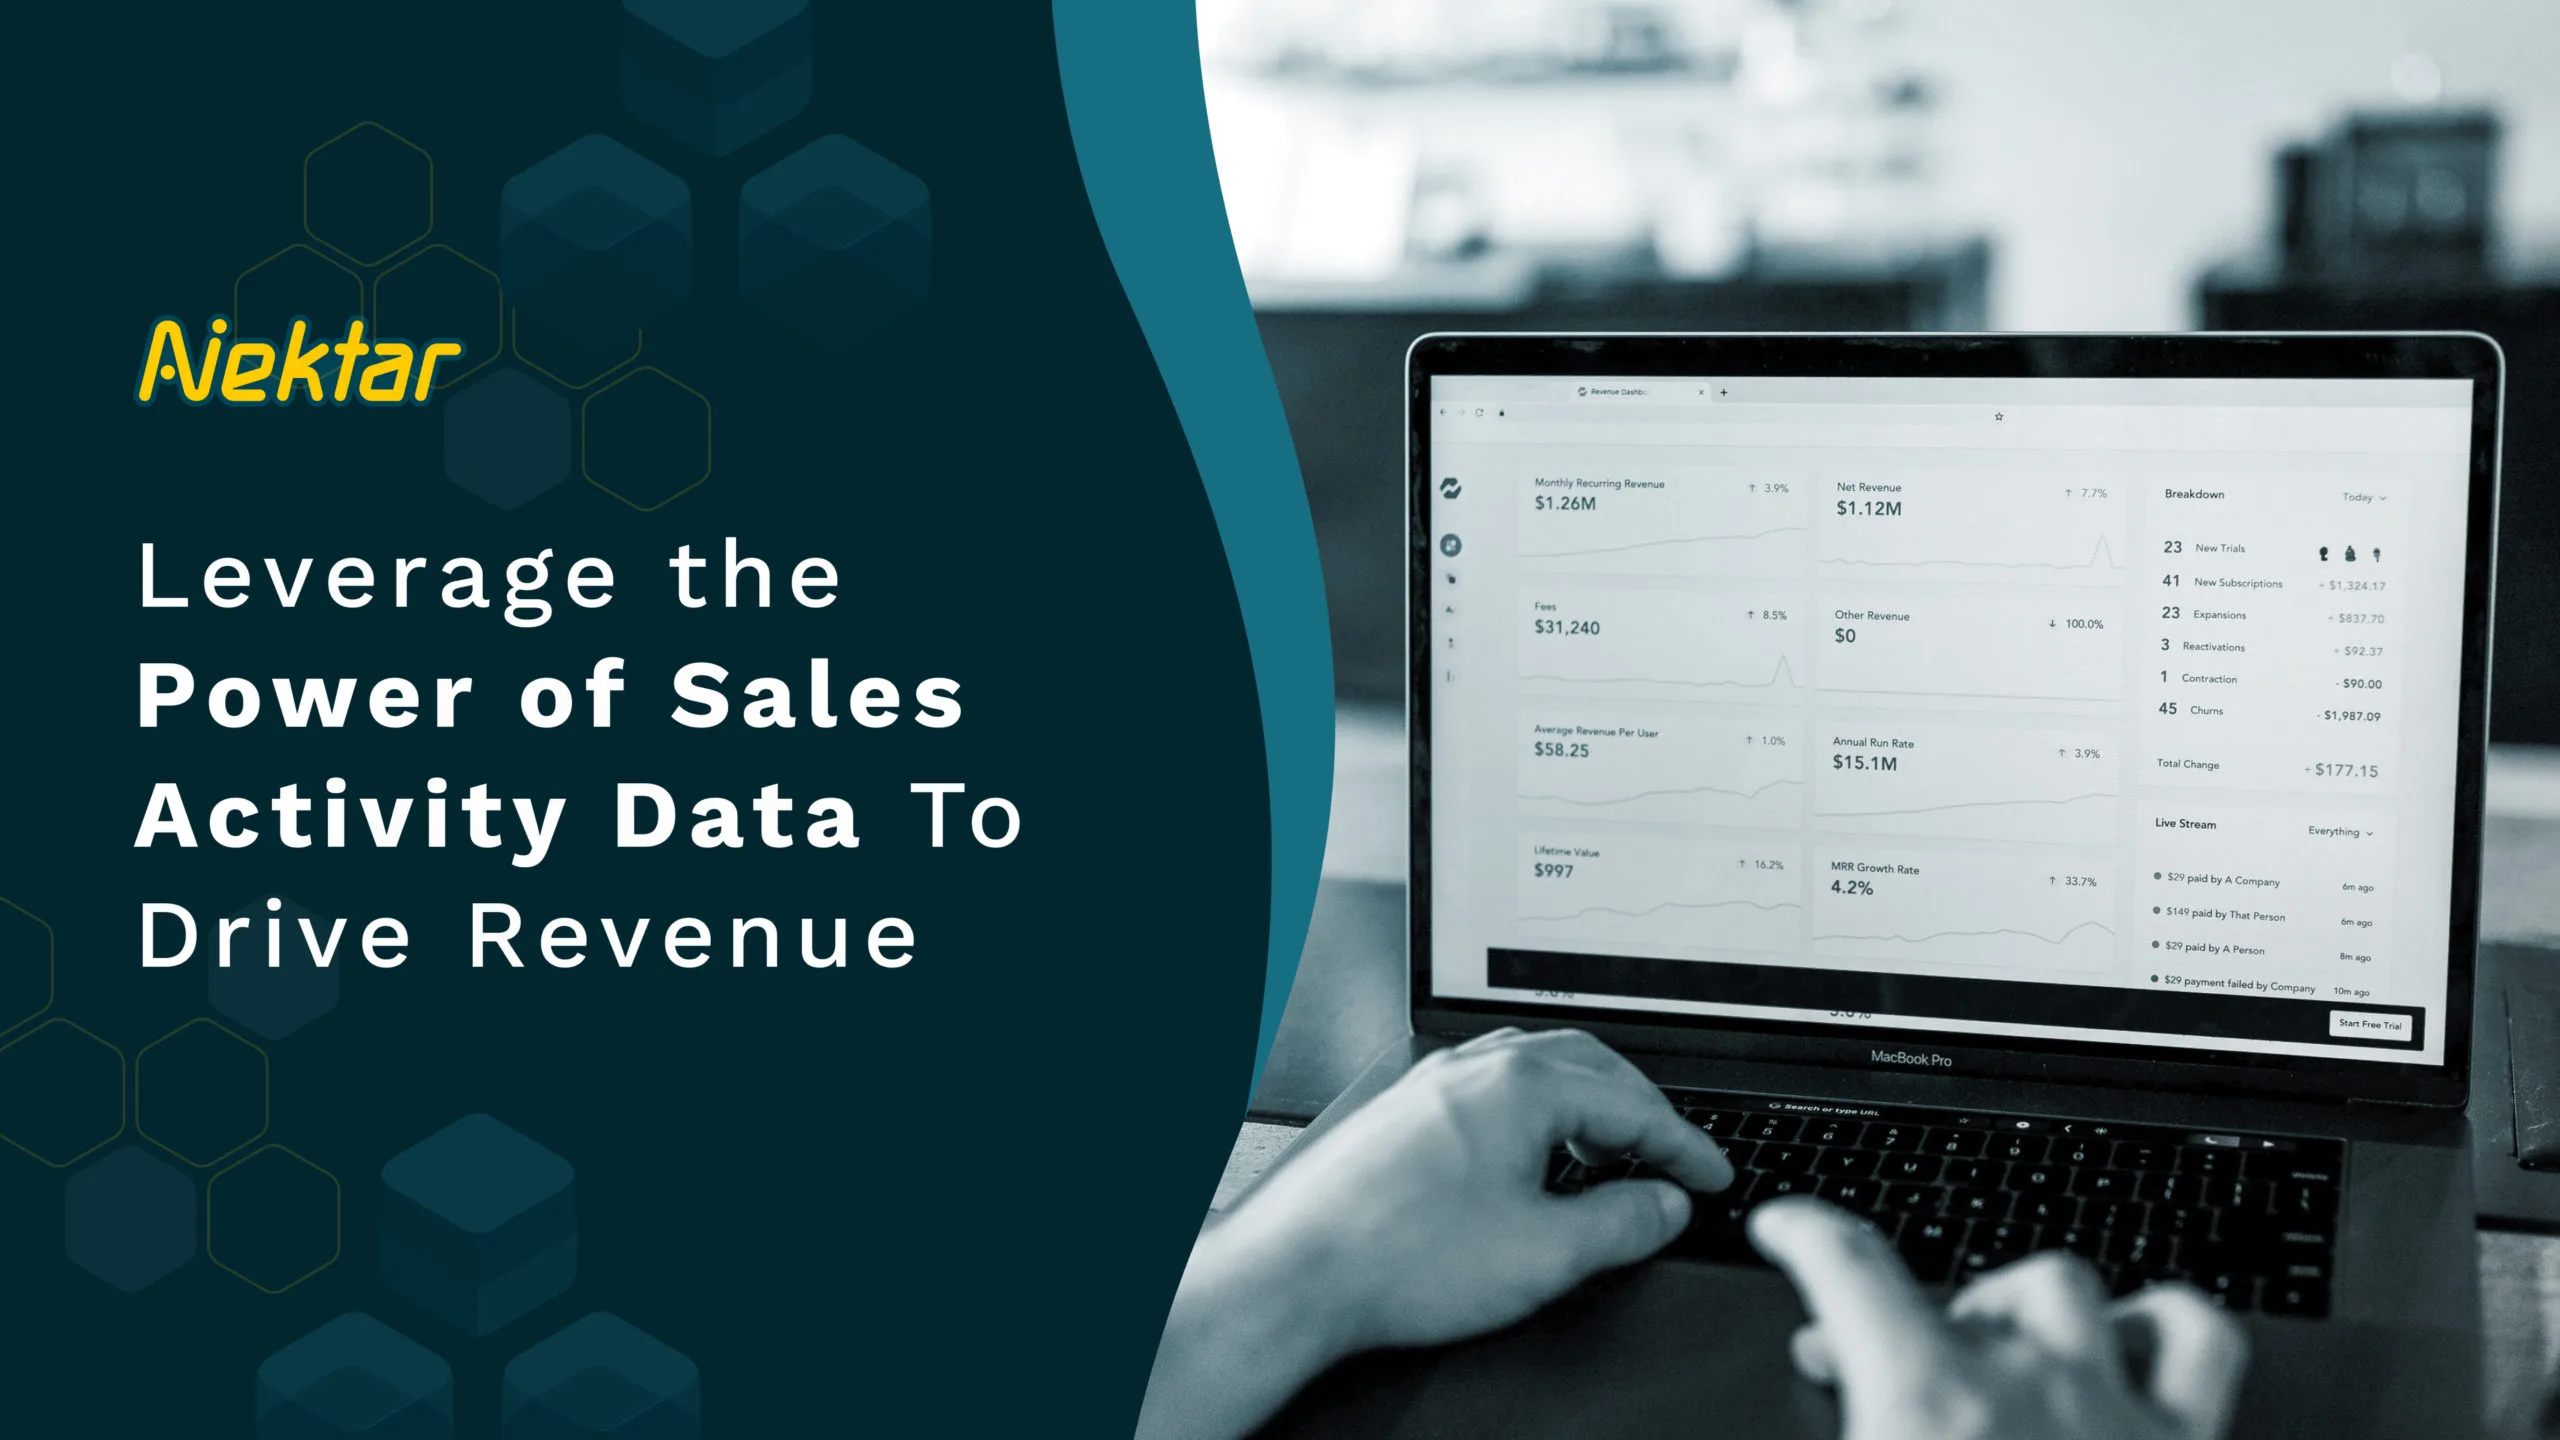 Leverage the Power of Sales Activity Data To Drive Revenue